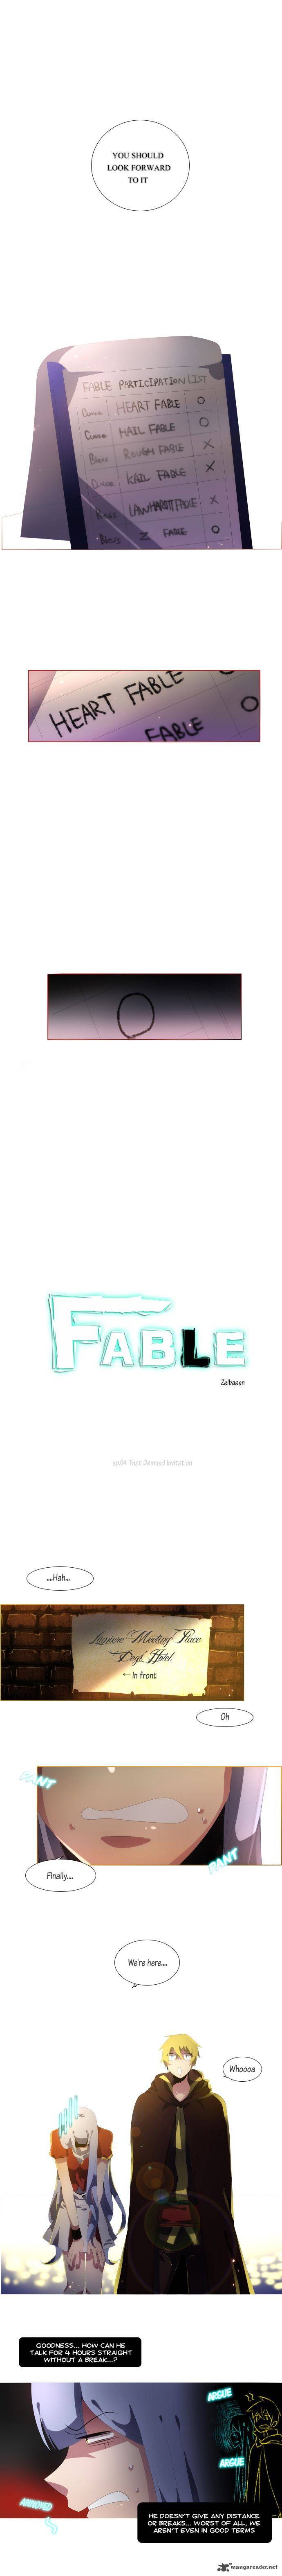 Fable 4 4